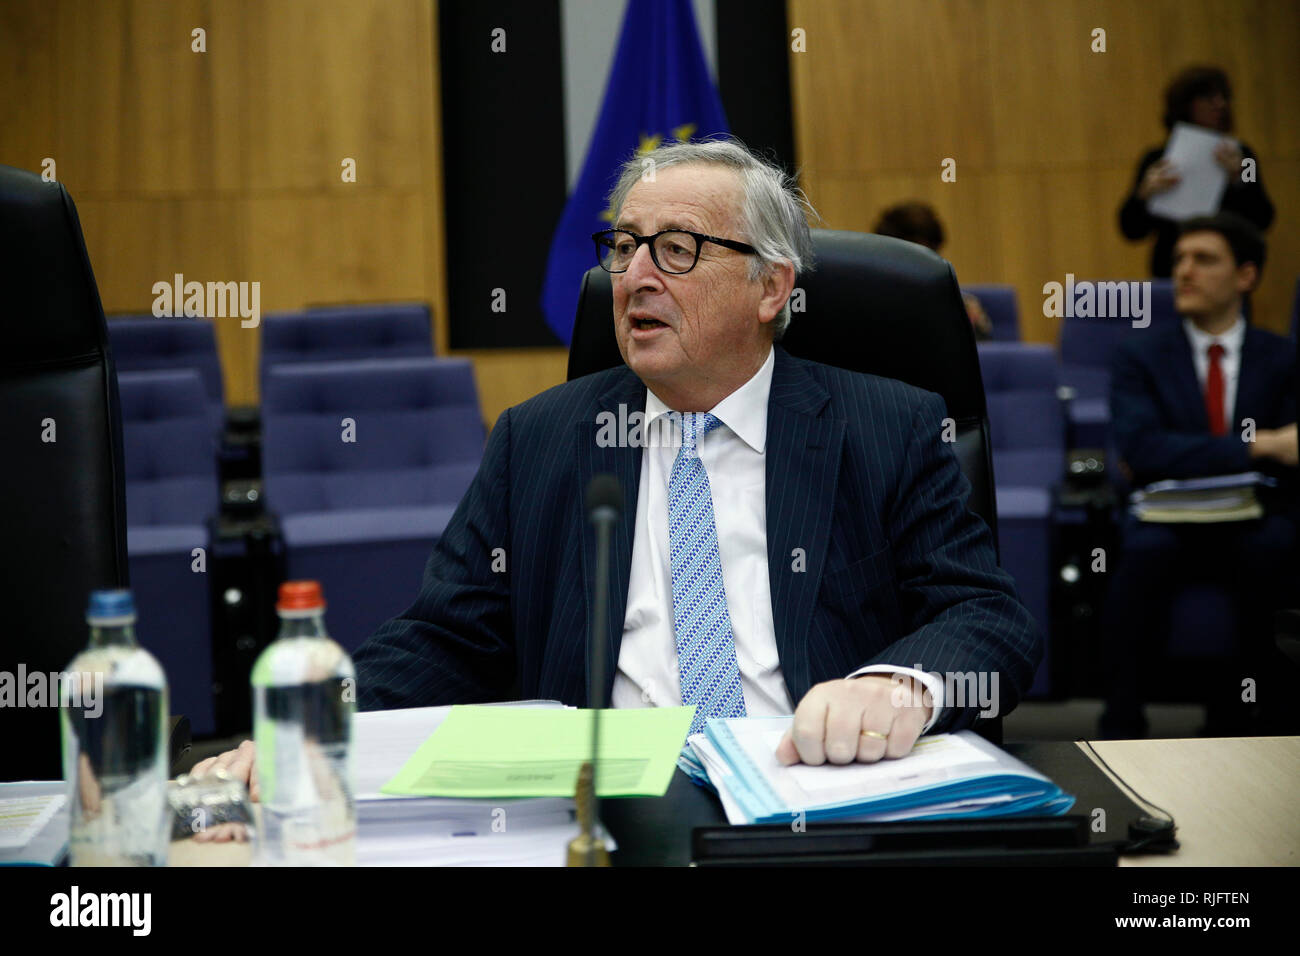 Brussels, Belgium. 6th Feb. 2019.President of the European Commission, Jean-Claude Juncker attends in a Weekly EU Commission College meeting. Alexandros Michailidis/Alamy Live News Stock Photo